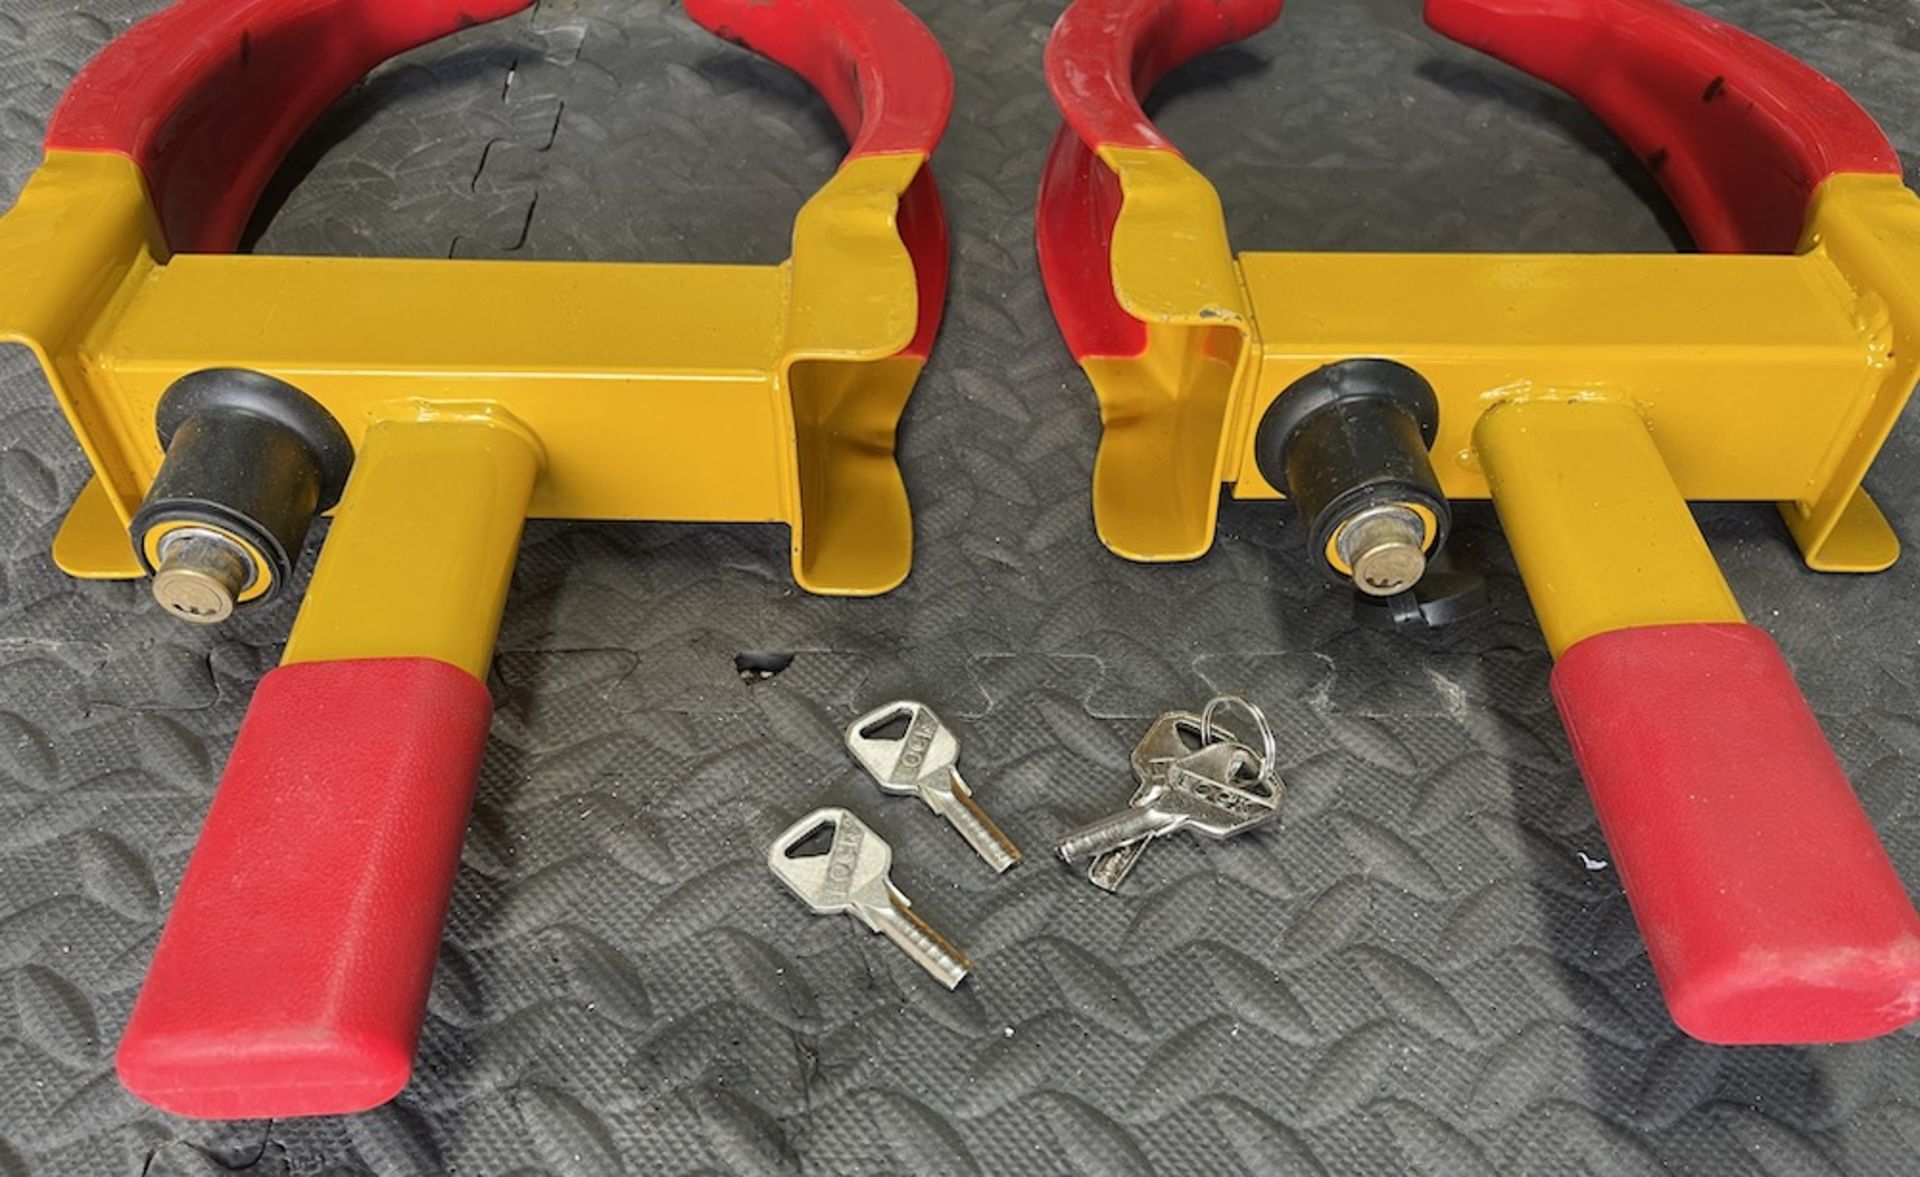 2x Lockable Wheel Clamps with 2 Keys | Universal Use - Image 2 of 2